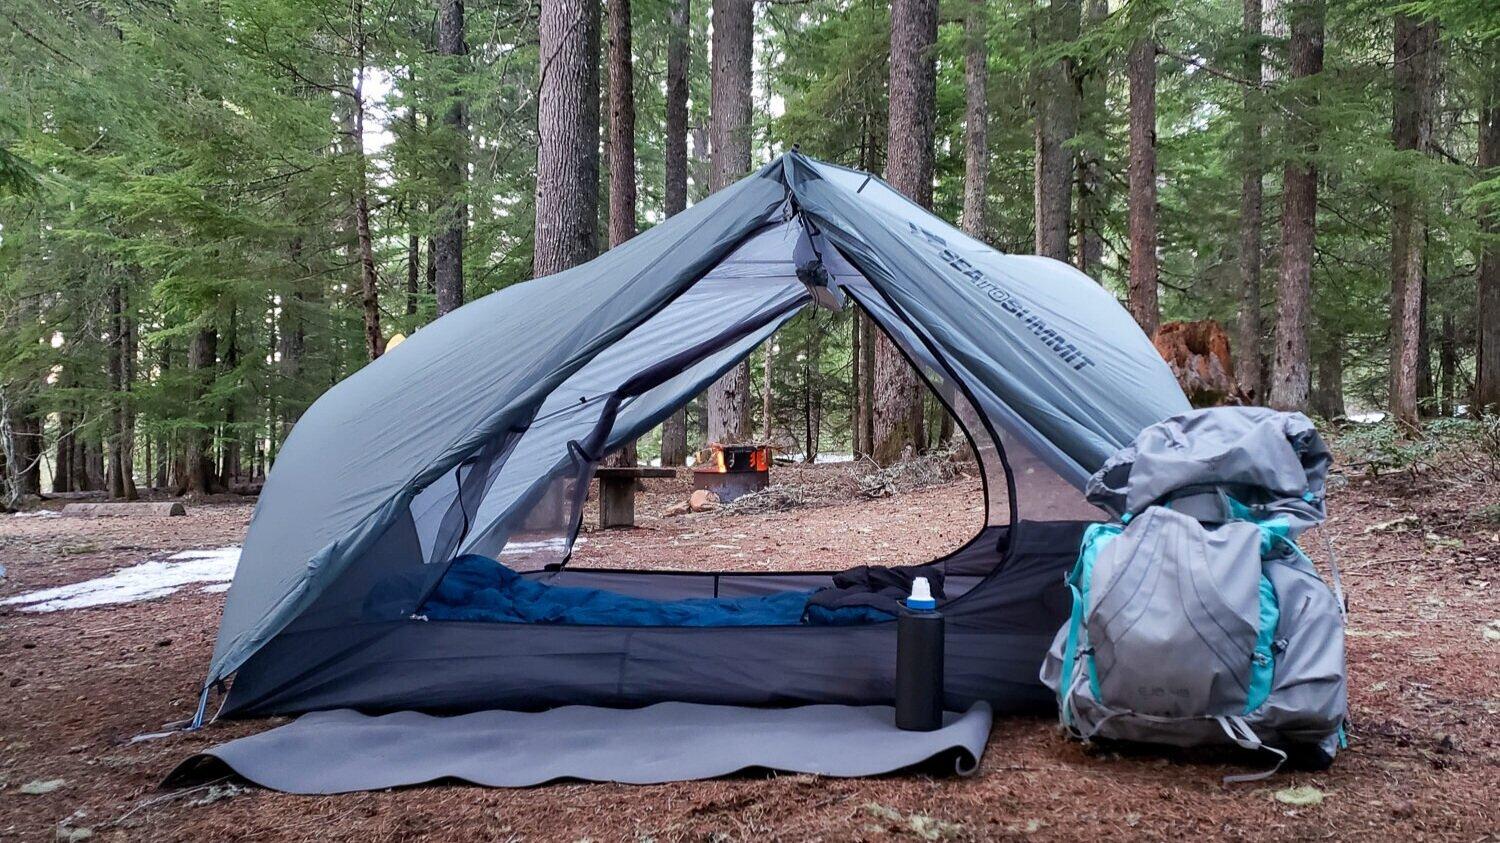 The Sea to Summit Telos TR2 backpacking tent set up in a campground